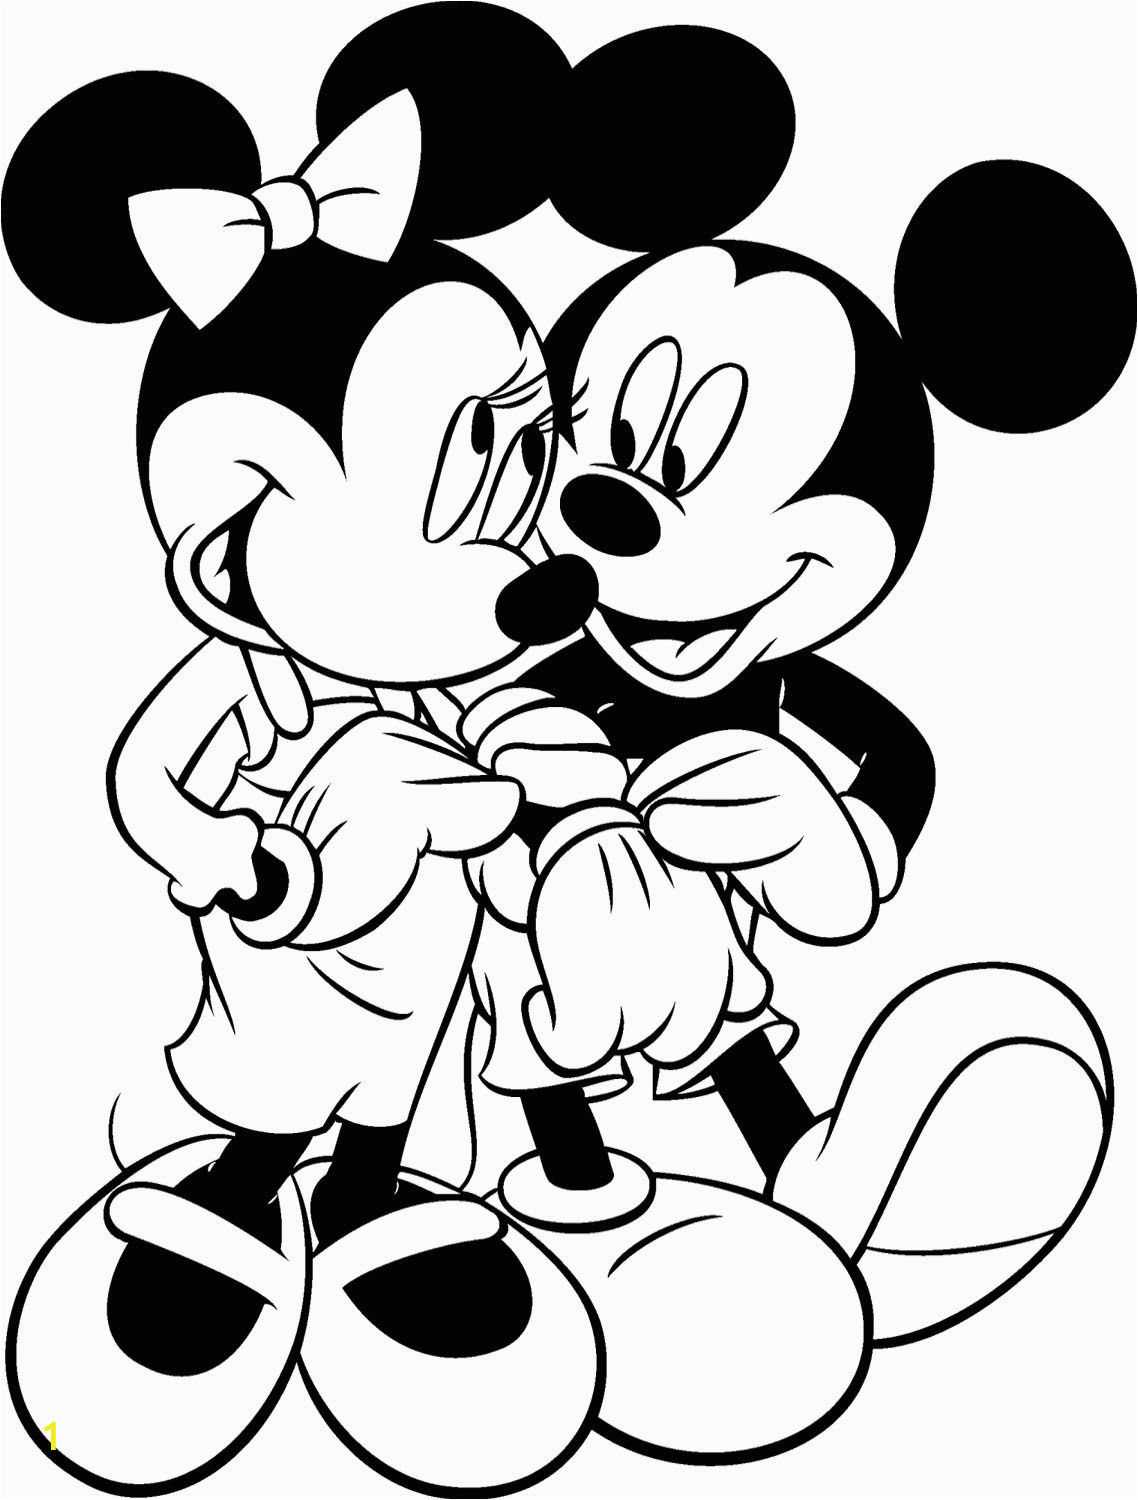 Mickey and Minnie Valentines Day Coloring Pages Valentines Mickey Mouse and Minnie Mouse Coloring Pages